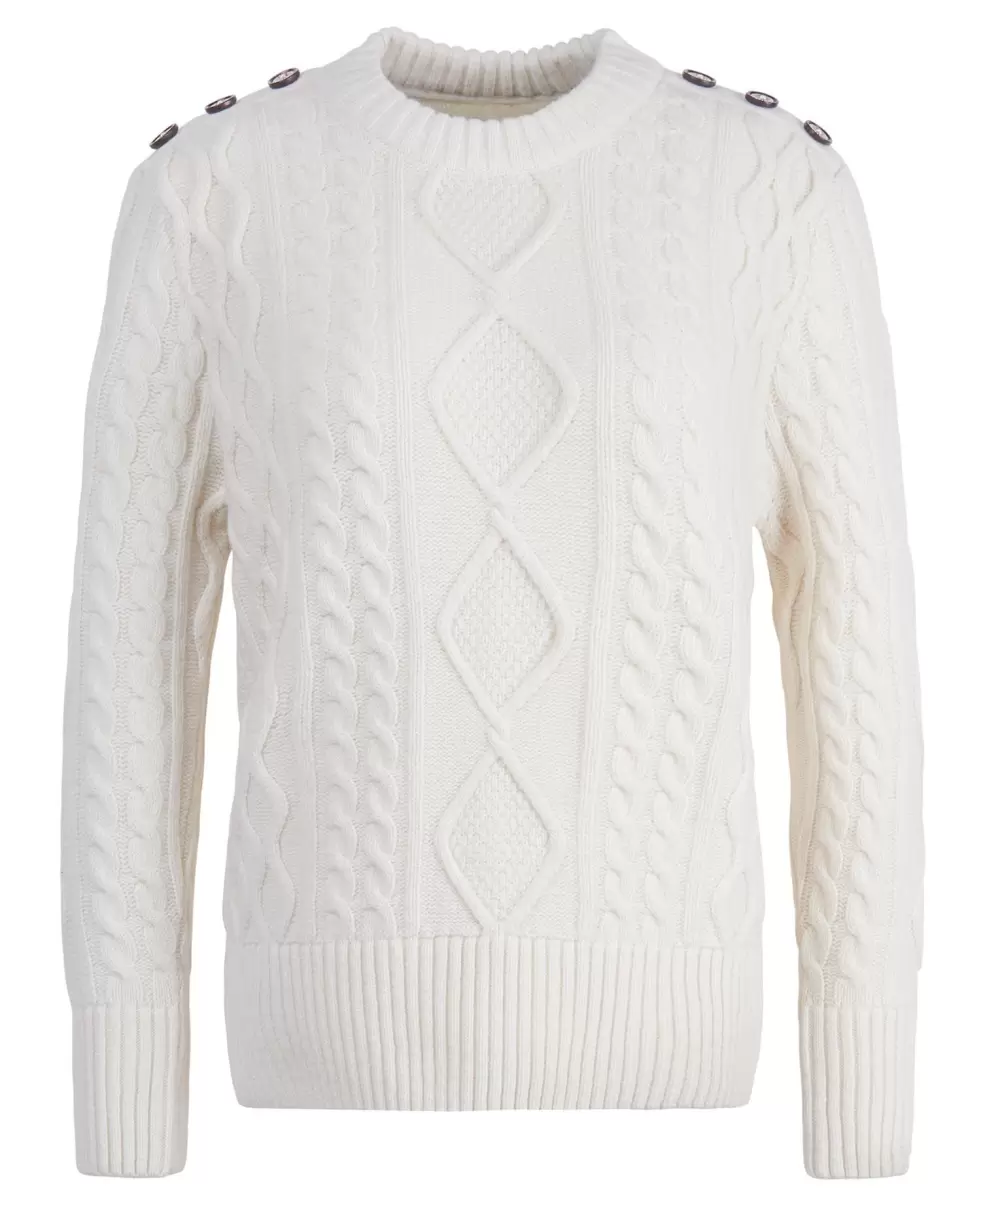 Barbour Greyling Knitted Jumper Jumpers Women White Buy - 1